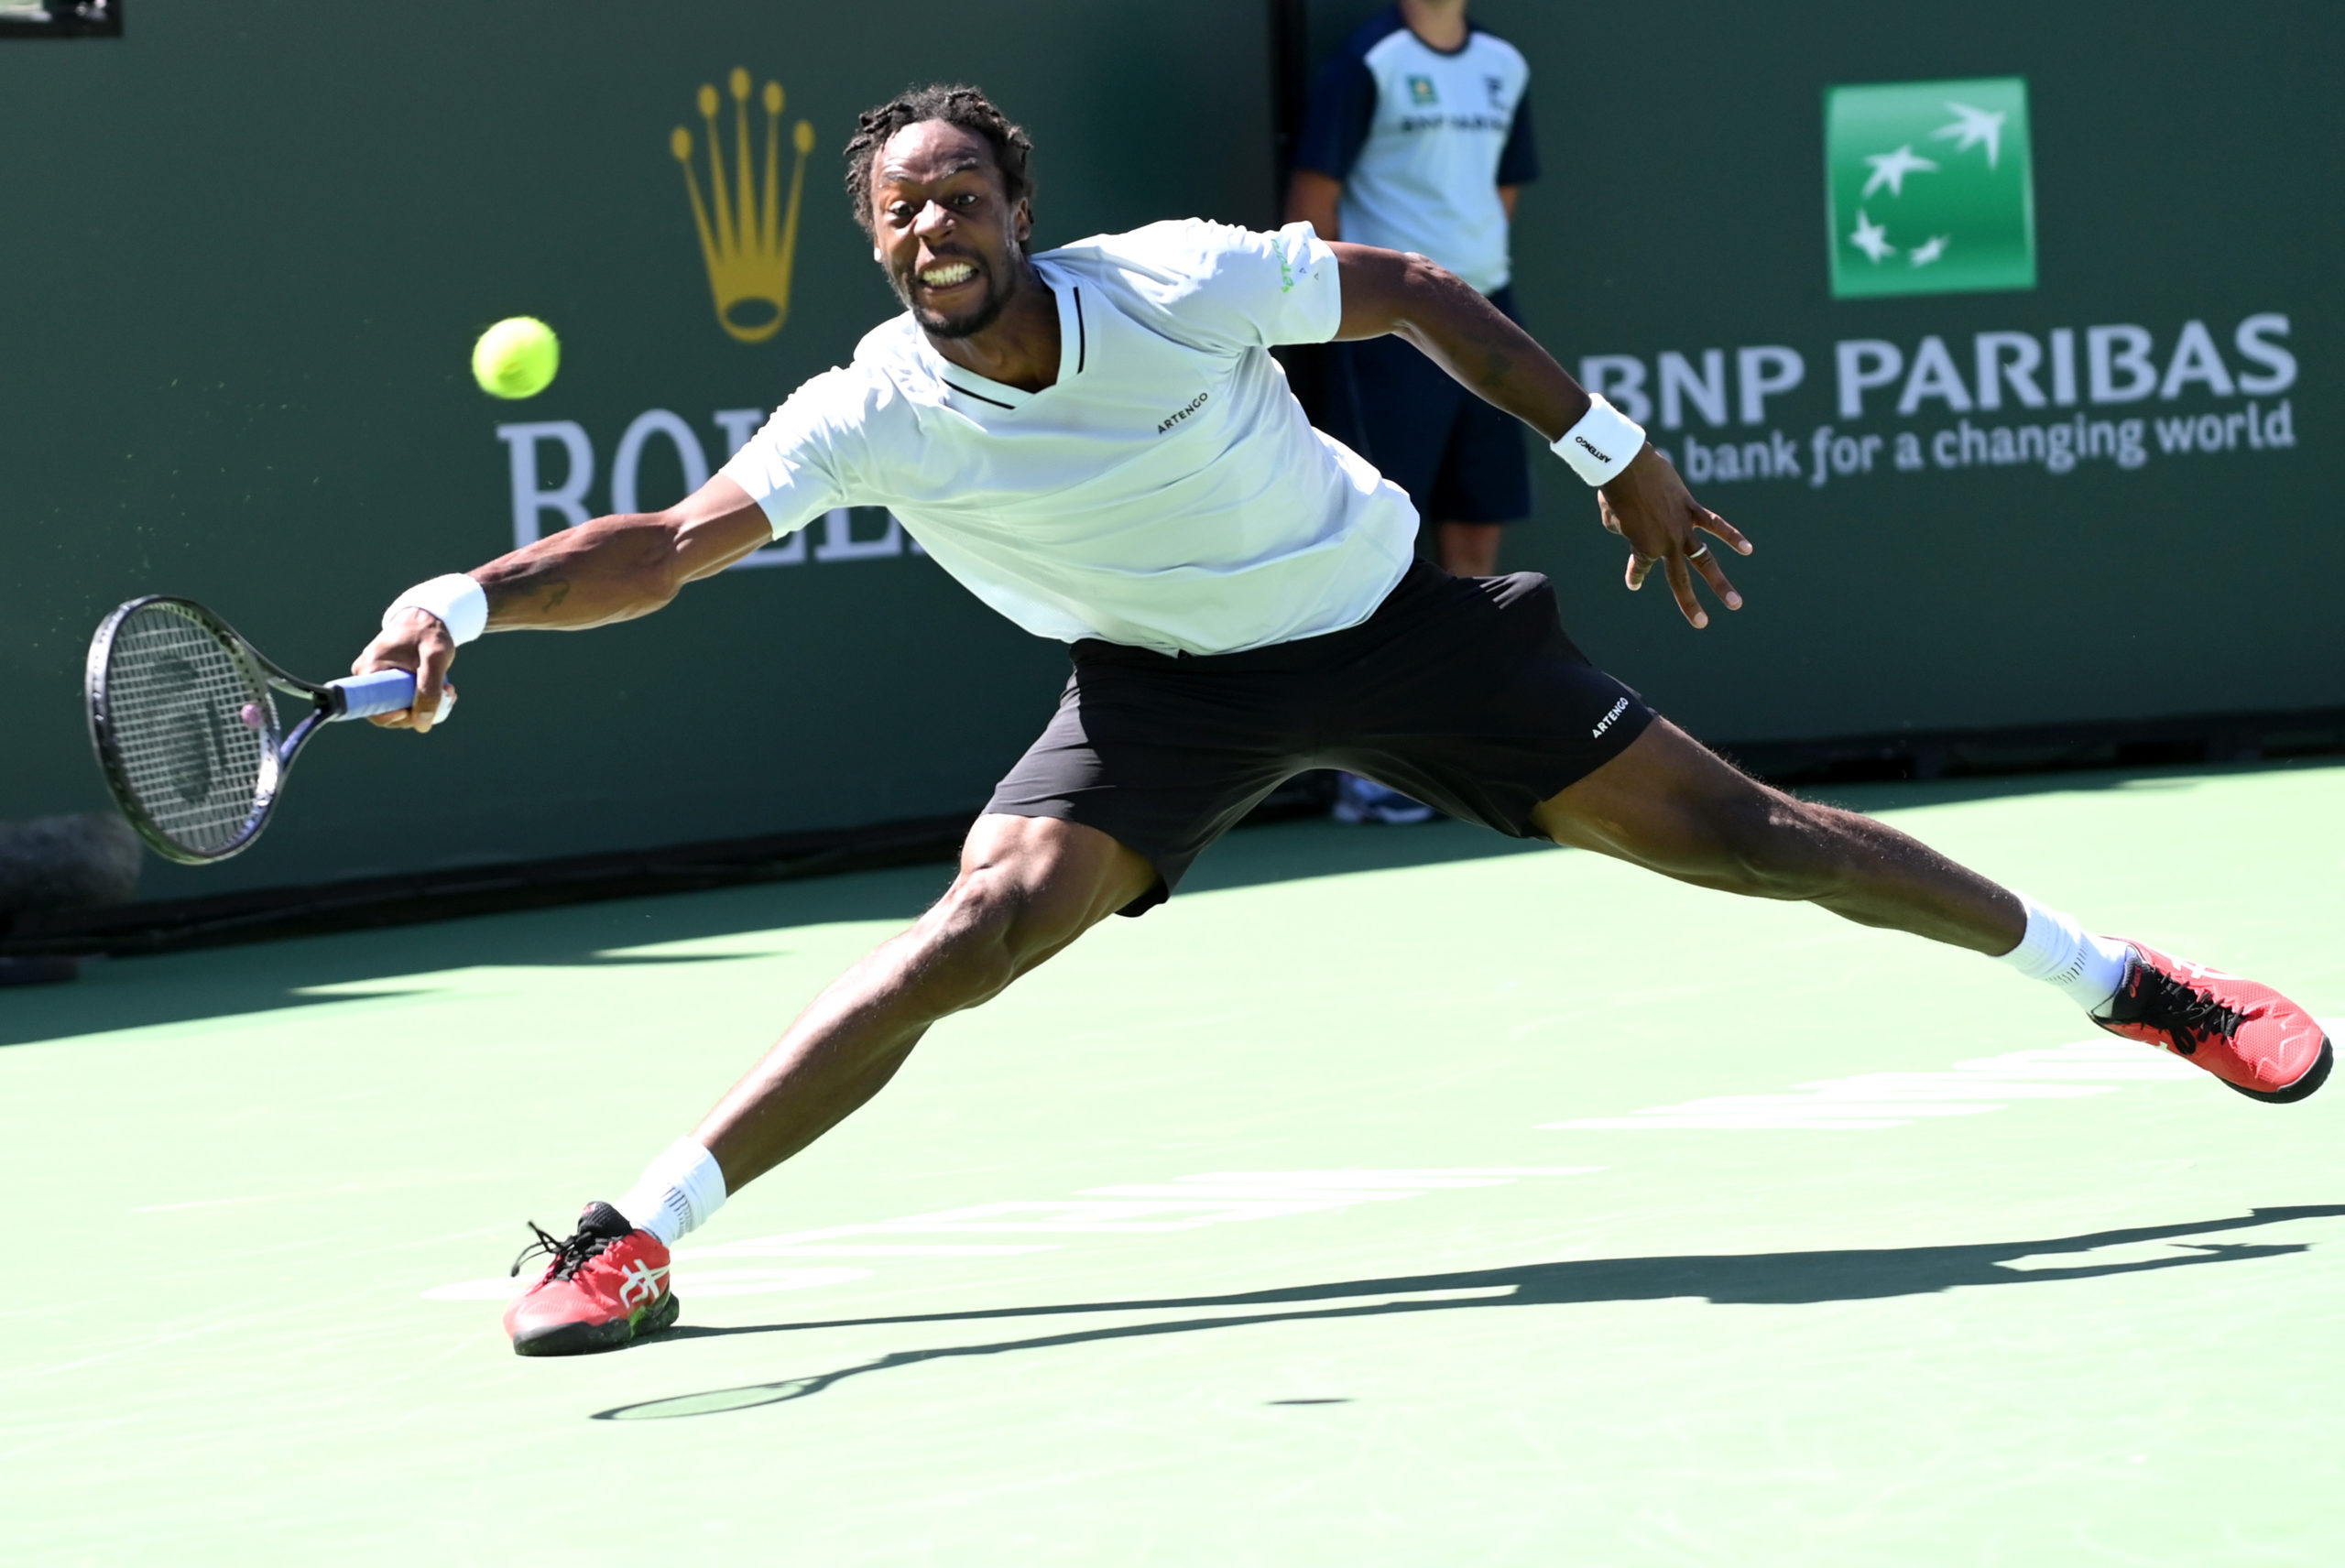 Mar 14, 2022; Indian Wells, CA, USA;  Gael Monfils (FRA) hits a shot as he defeated Daniil Medvedev (RUS) in his third round match during the BNP Paribas Open at the Indian Wells Tennis Garden.